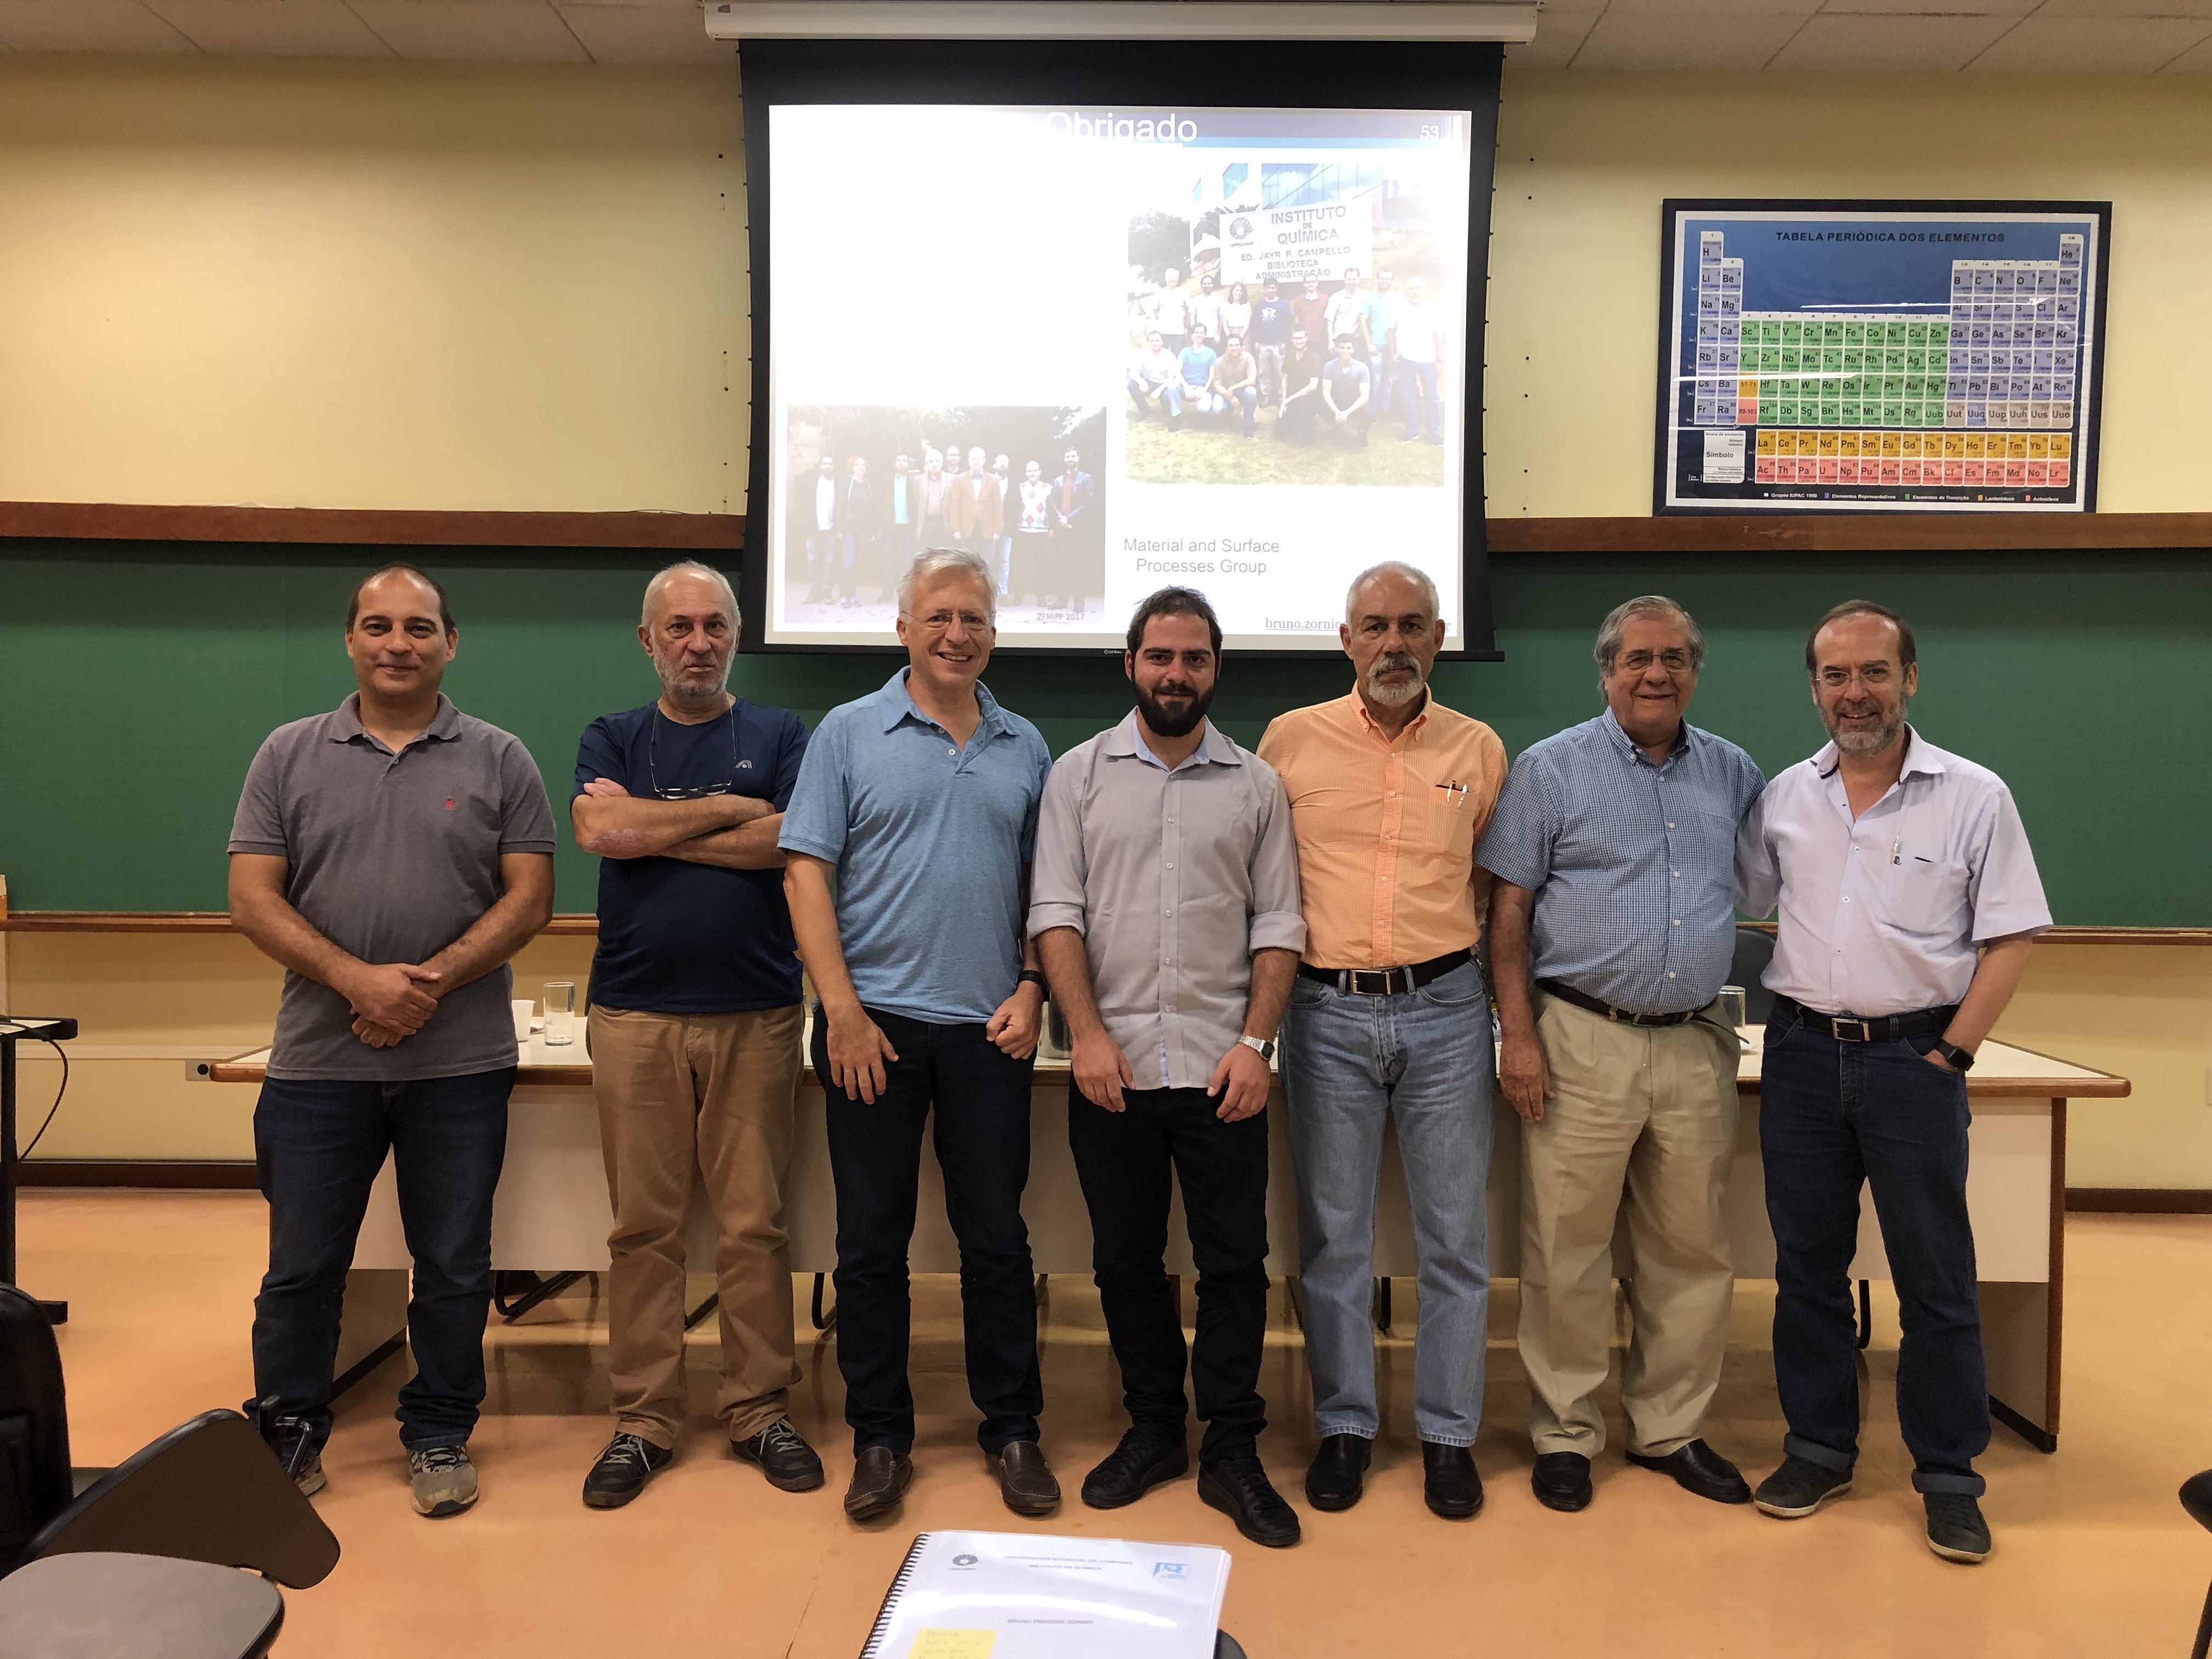 Bruno's thesis defense, it was a bittersweet moment, a friend of us is leaving our group to face this wild scientific world, go Bruno go! From left to right: Prof. Ricardo, Prof. Pedro, Prof. Miguel, PhD. Bruno, Prof. Zacarias, Prof. Elson Longo, Prof. Rogério Custódio.